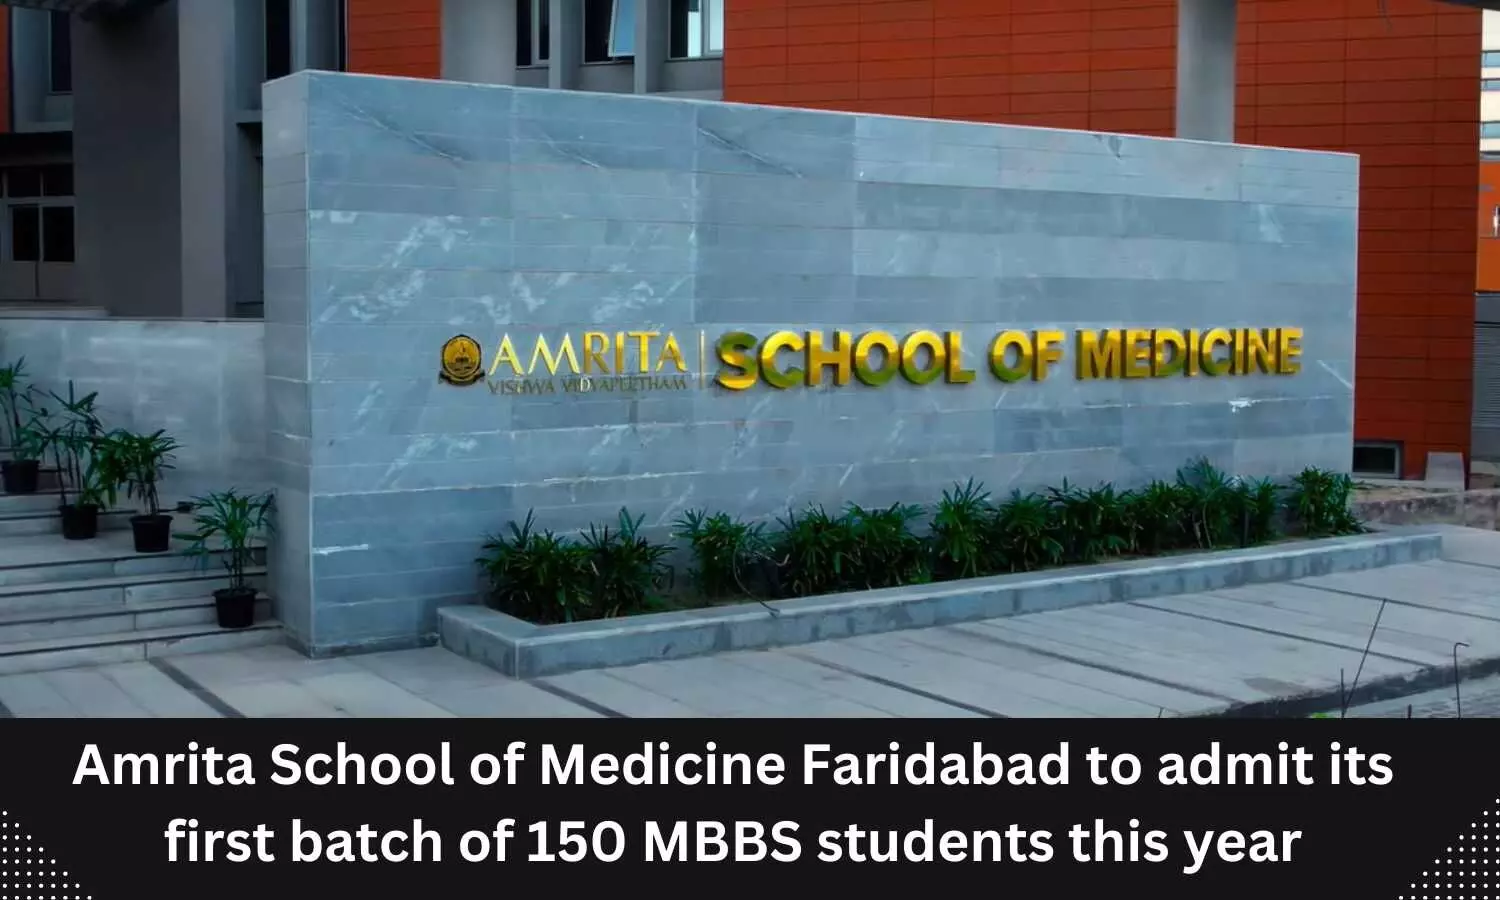 Amrita School of Medicine Faridabad to admit first batch of MBBS students in August